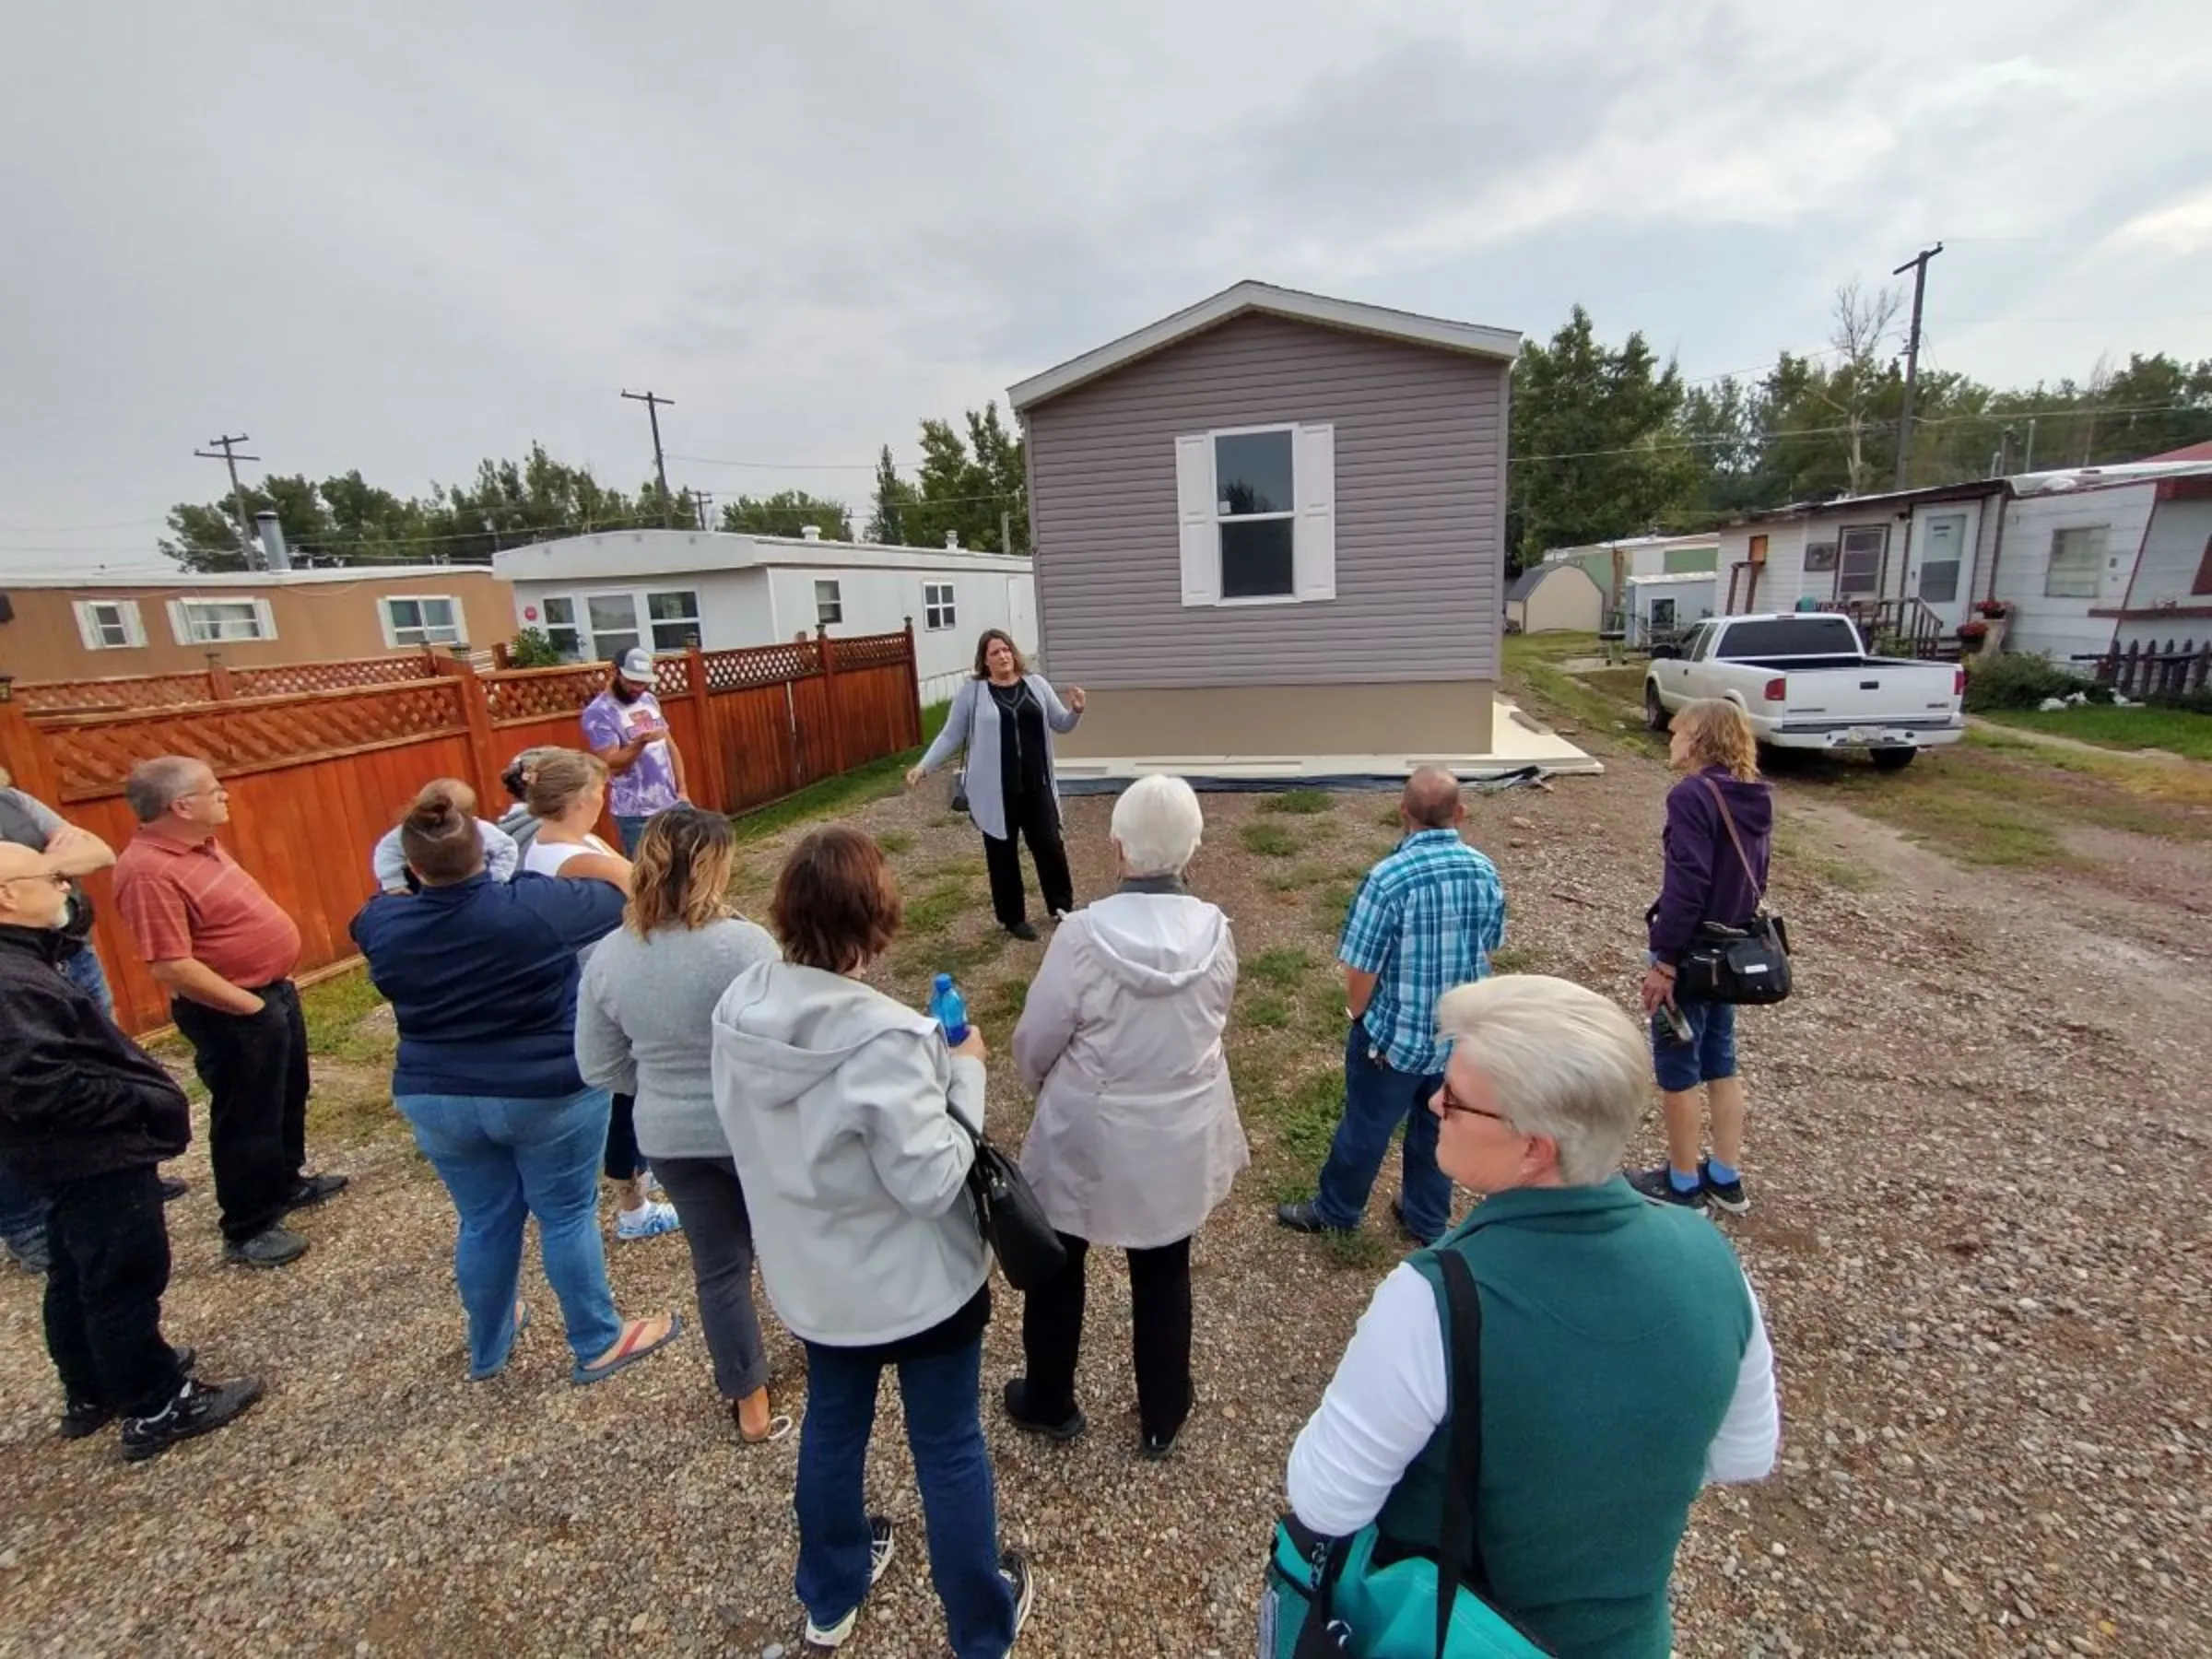 Residents and others view a new “infill” manufactured home placed out of flood risk at a mobile home community in Great Falls, Montana, in September 2022